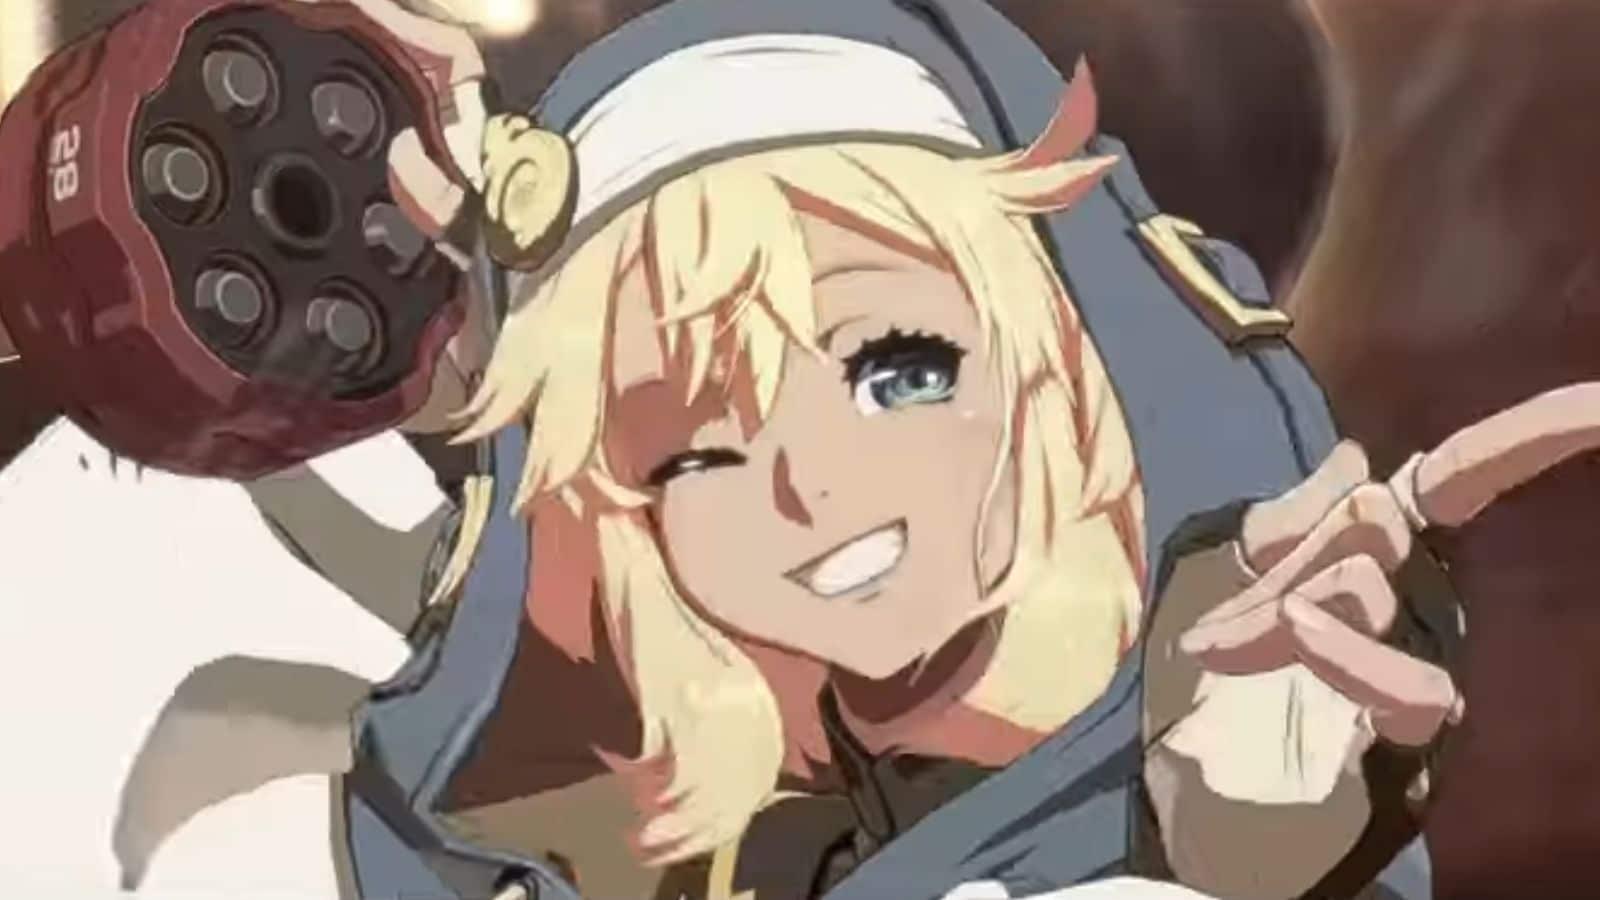 Guilty Gear Strive players celebrate as Bridget comes out as trans